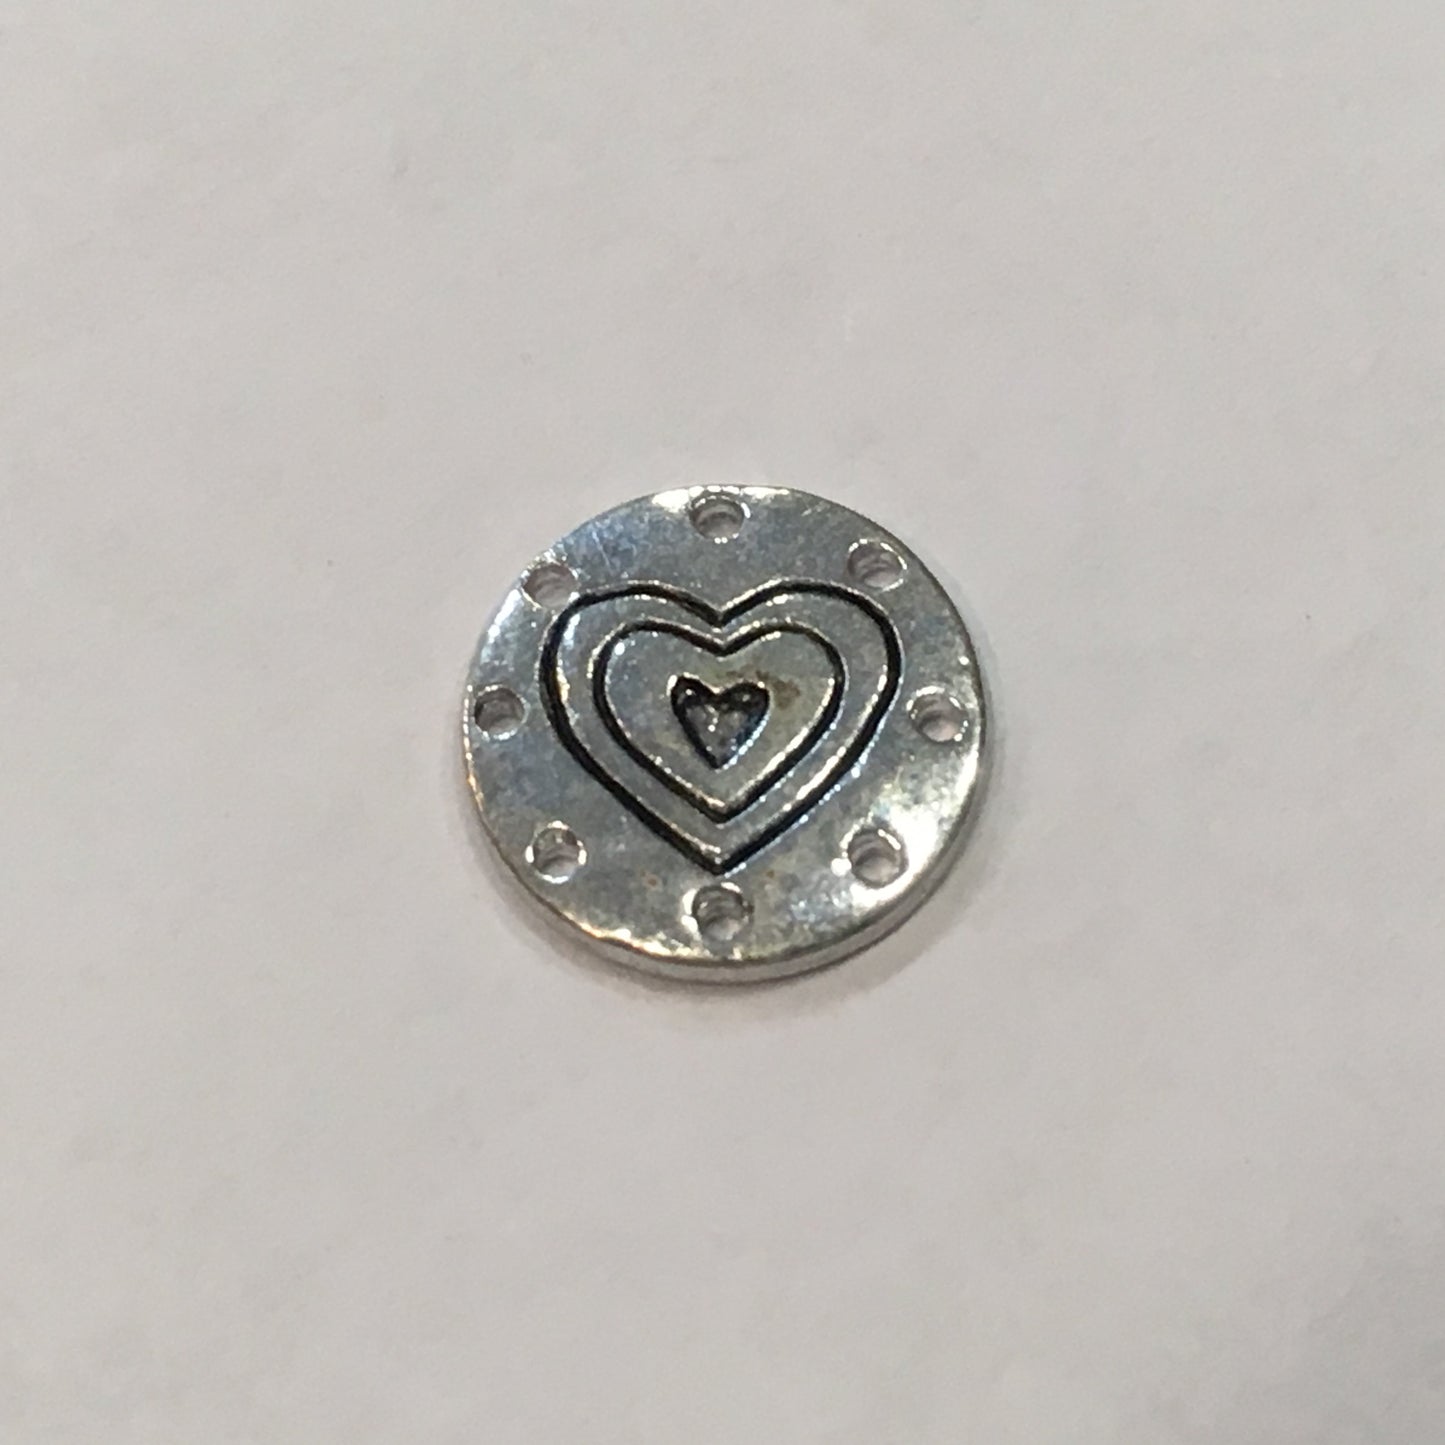 Antique Silver Heart Round Charm, 15 mm